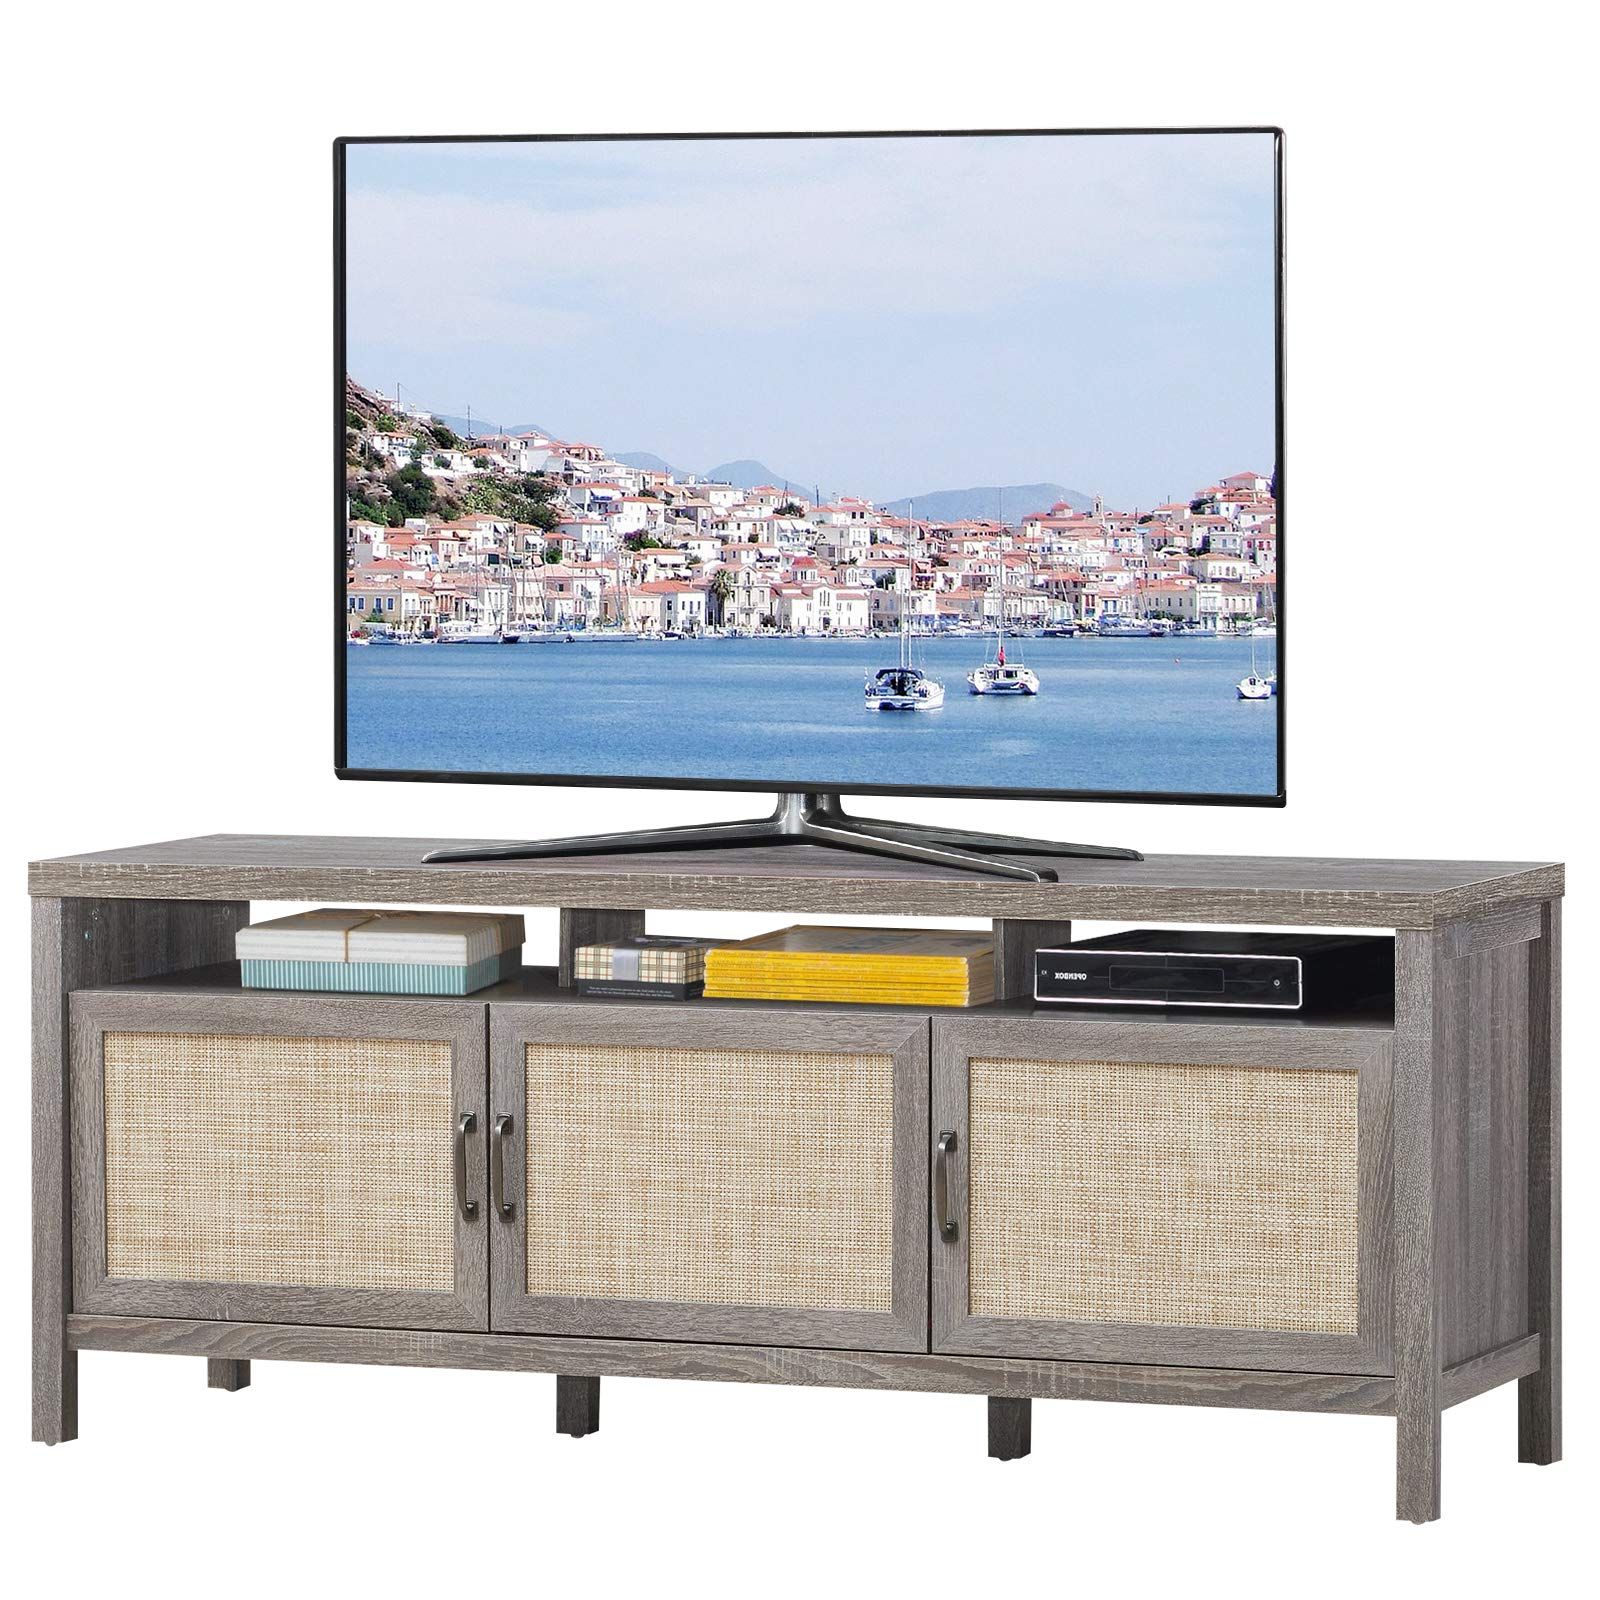 Buy Tangkula Farmhouse Rattan Tv Stand, 62 Inches Modern Boho Regarding 2019 Farmhouse Rattan Tv Stands (View 3 of 15)